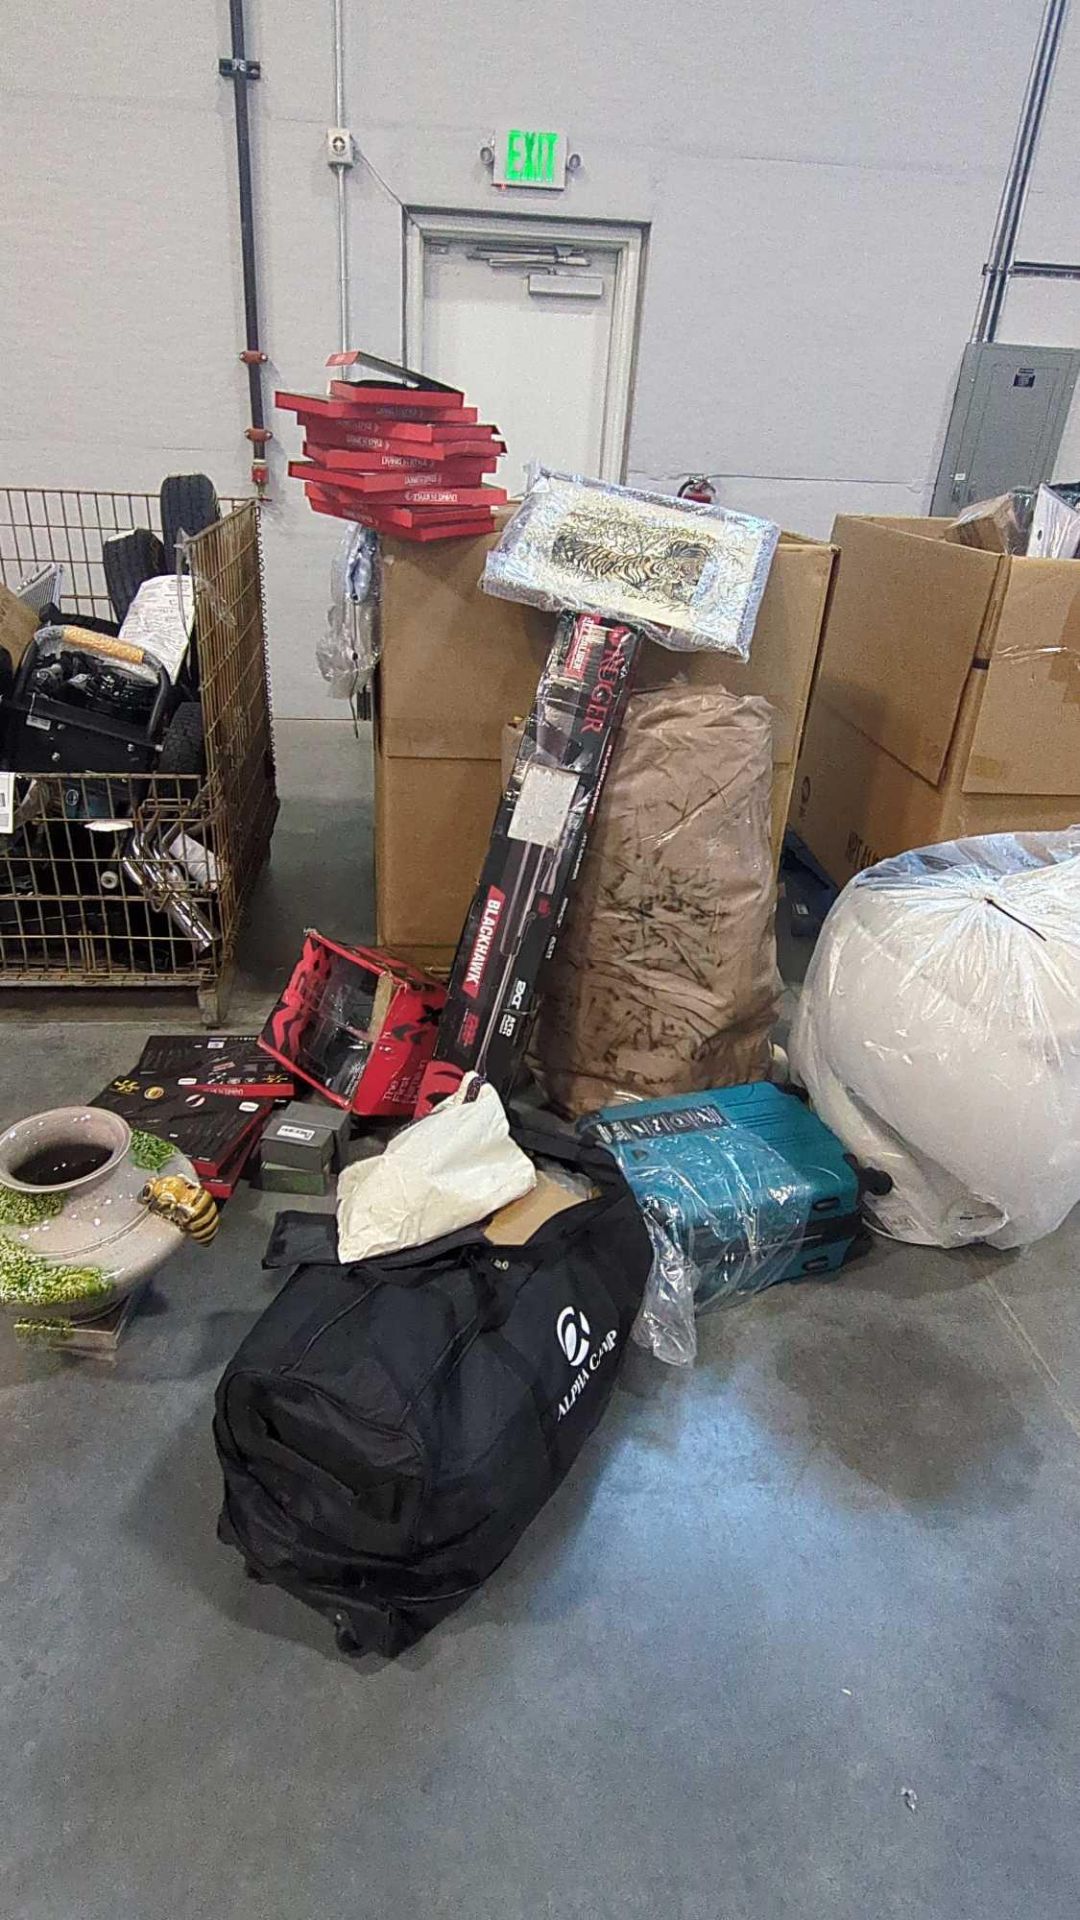 Litter Robot?, alpha camp tent, Knife sets,Multiple Luggage, Midea AC, BP Spa and lots of Donner min - Image 9 of 24